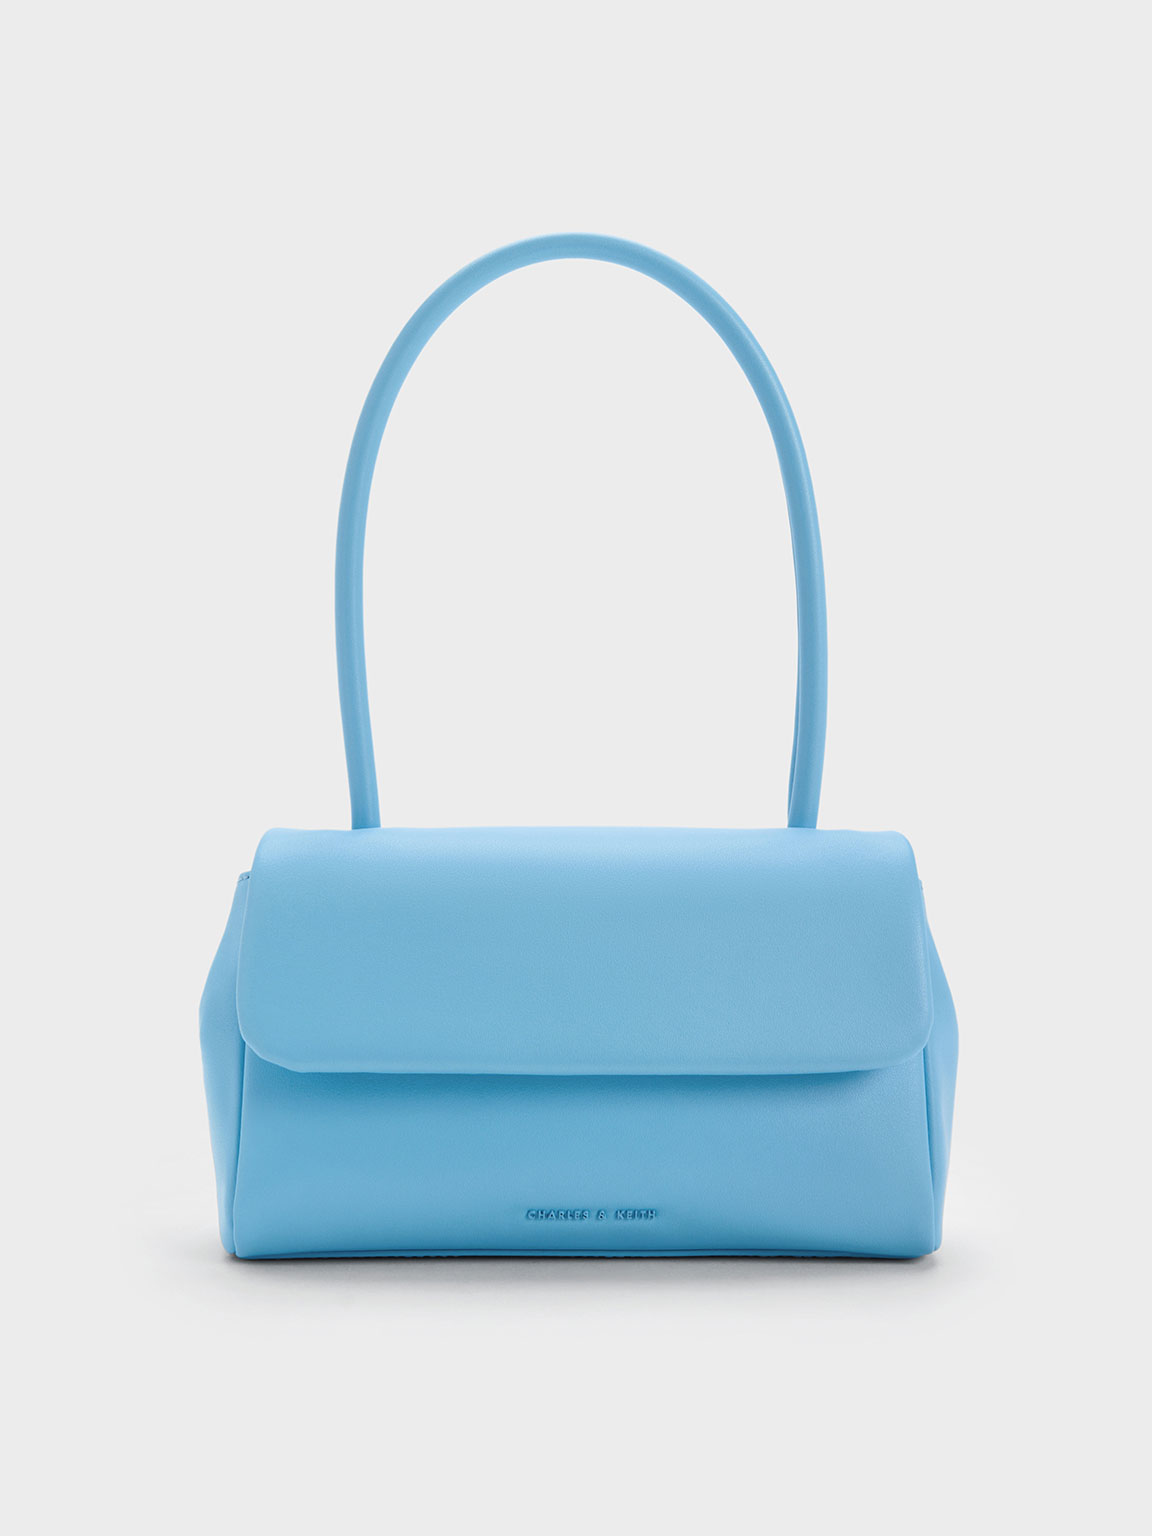 Luxury bag - Burrow 22 shoulder bag in light blue leather with gold  finishings